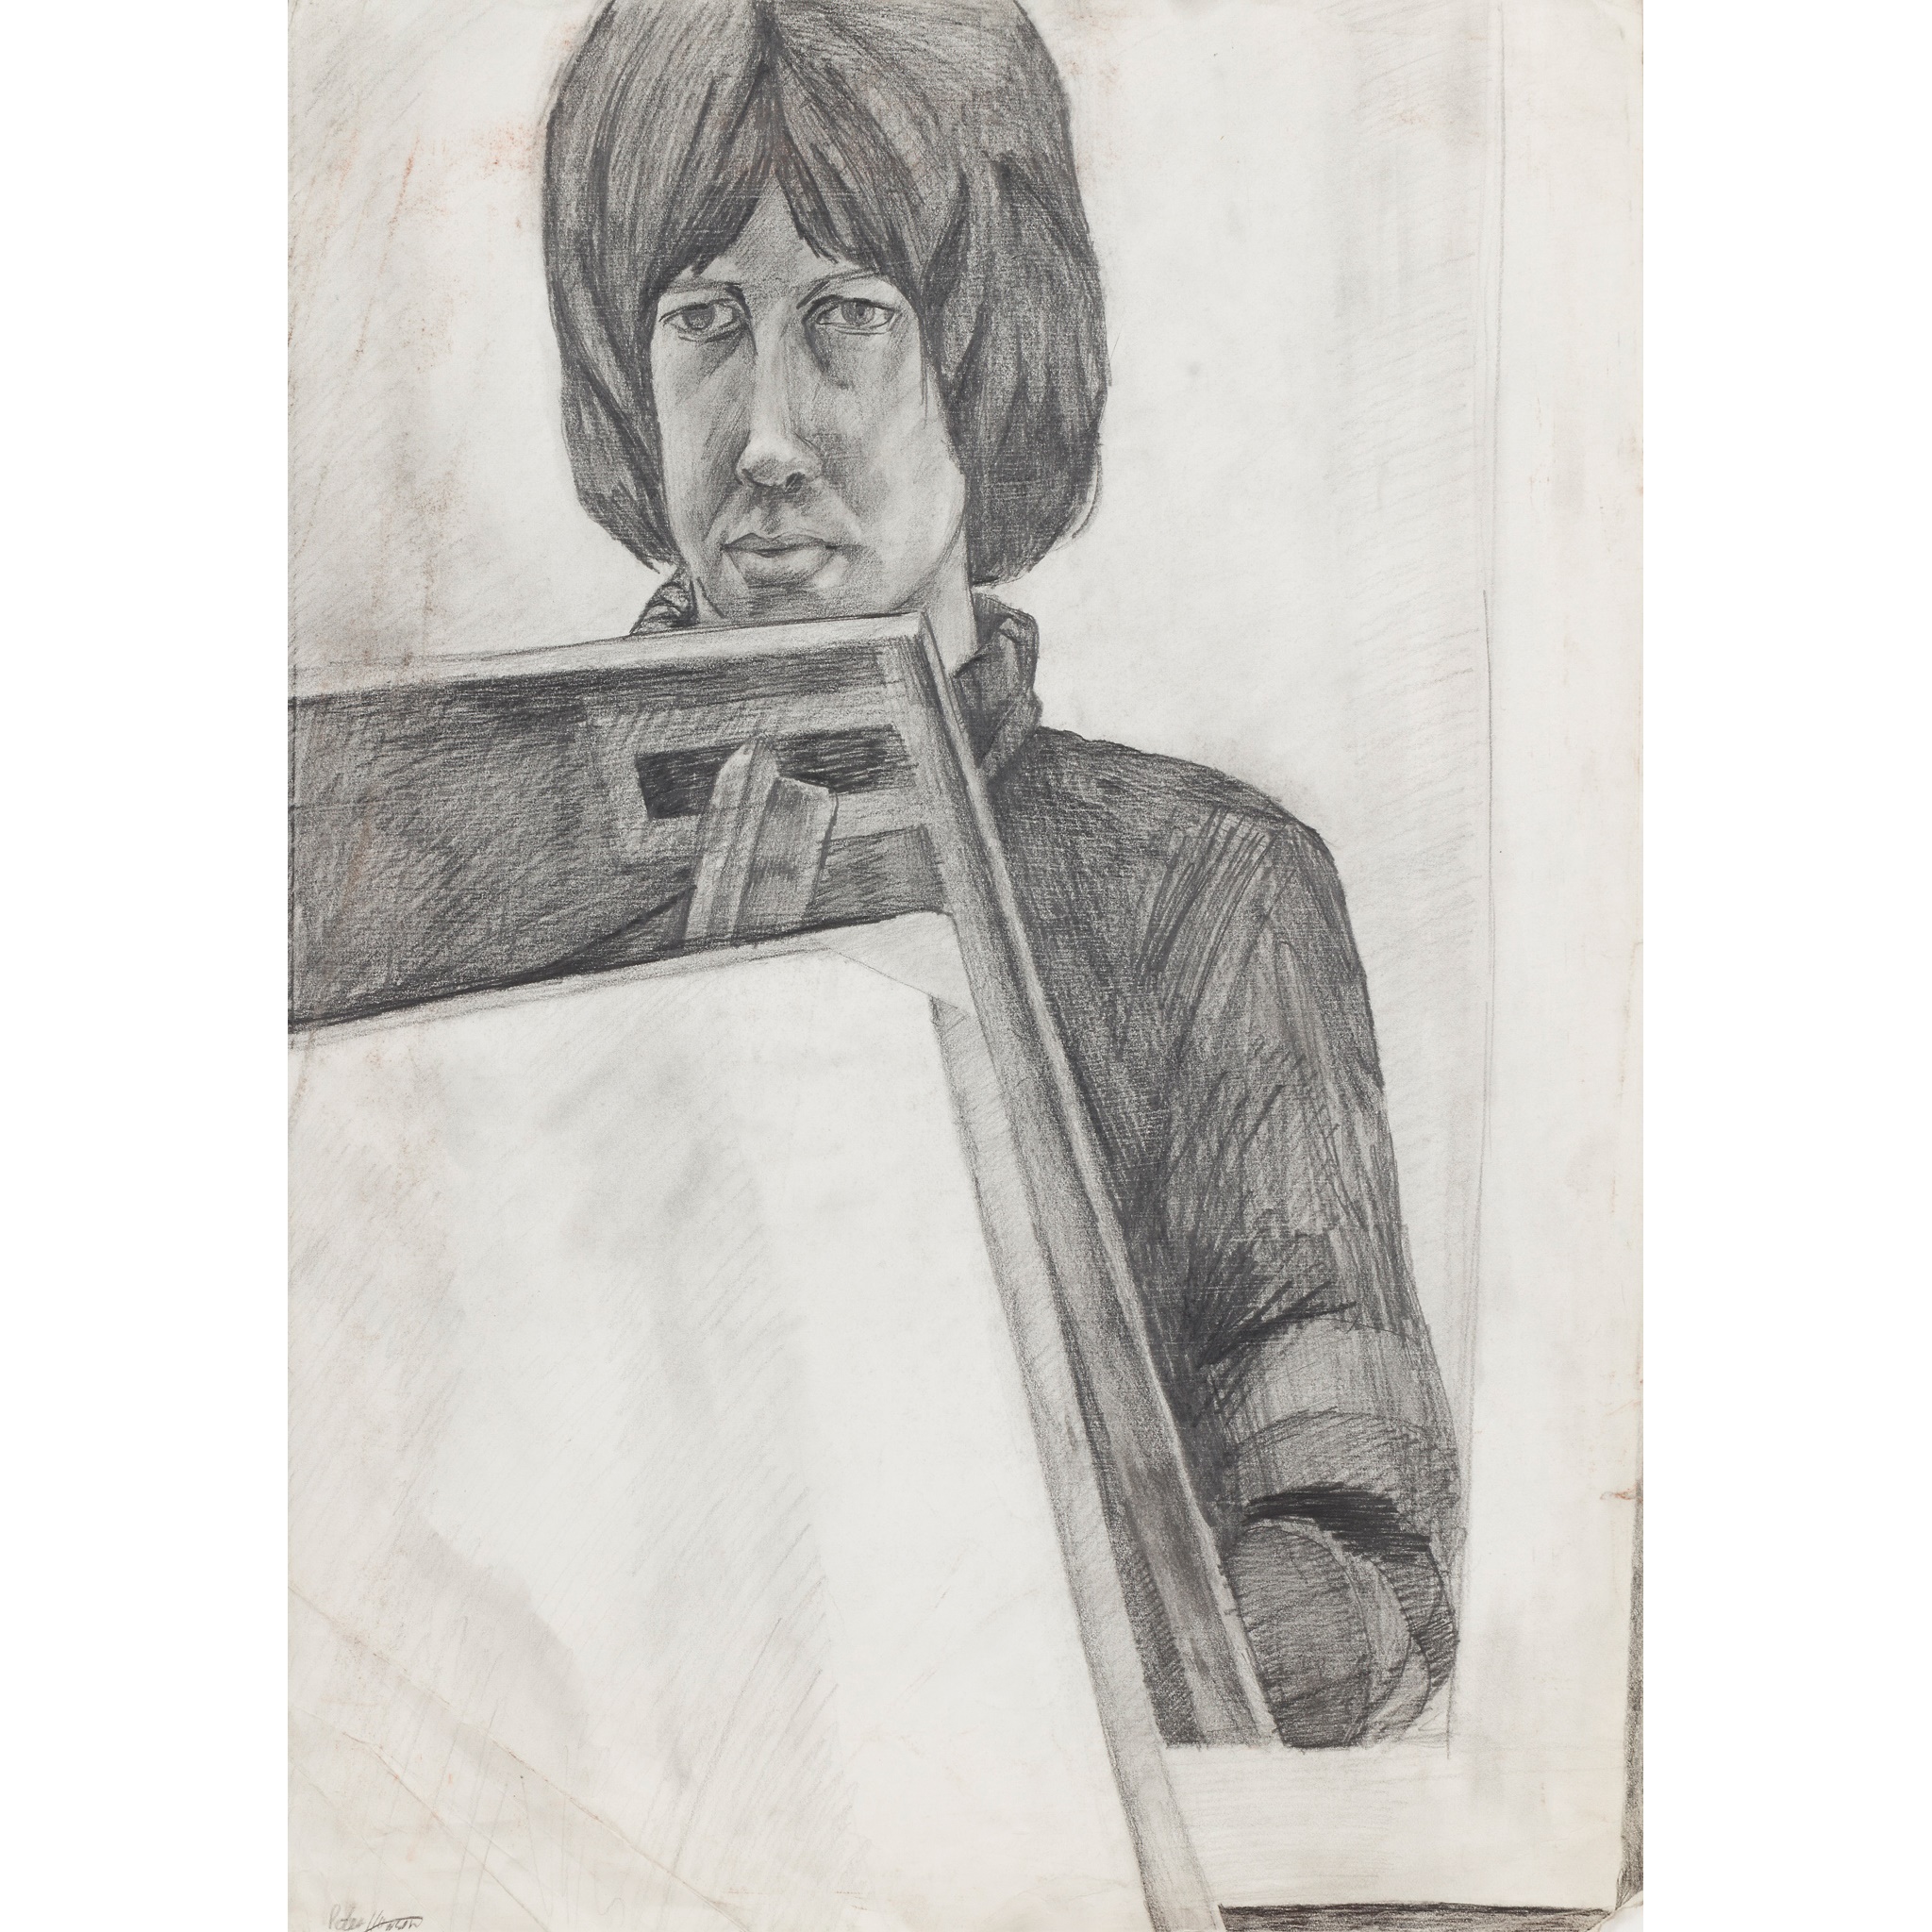 LOT 23 | § PETER HOWSON O.B.E. (SCOTTISH 1958-) | EARLY SELF-PORTRAIT OF THE ARTIST AS A YOUNG MAN | £600 - £800 + fees